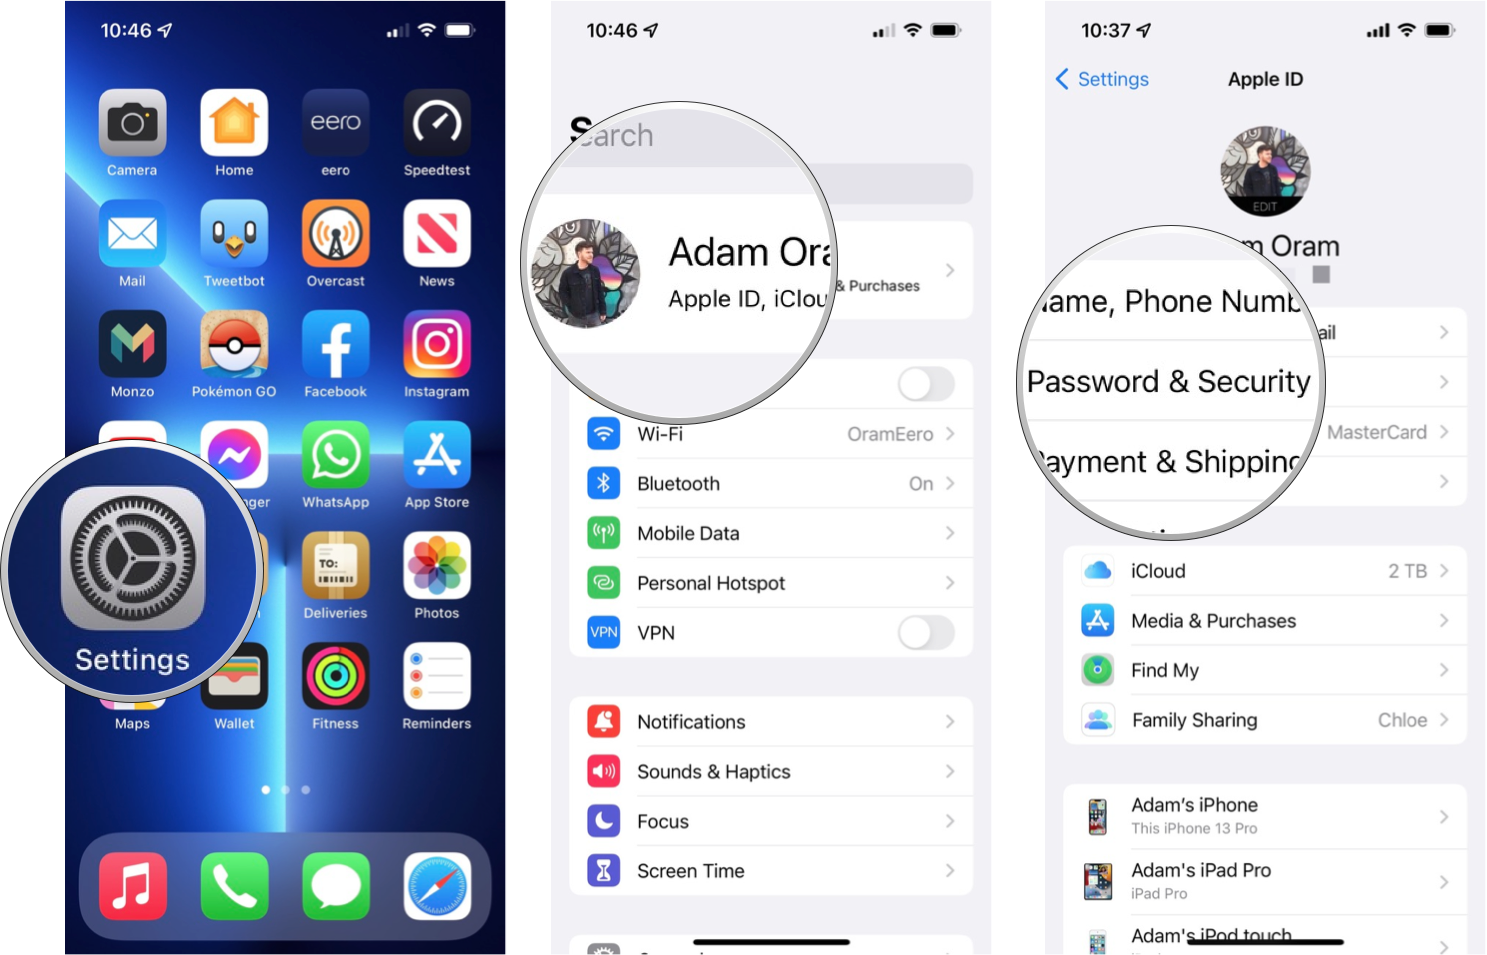 How to add a Legacy Contact on iPhone or iPad: Open Settings, tap your name, tap Password & Security